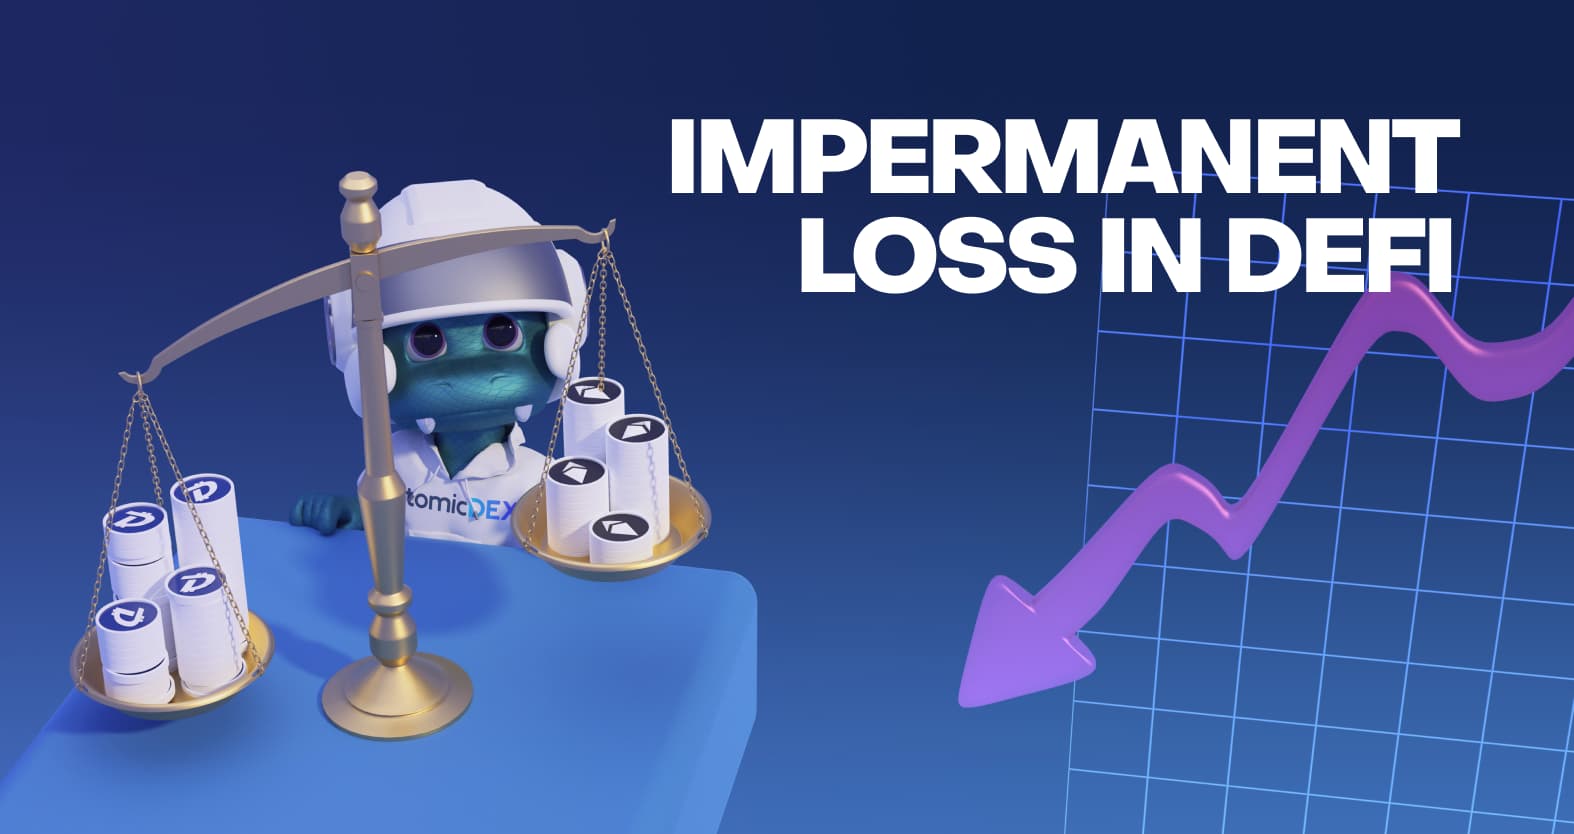 An Overview of Impermanent Loss in the DeFi Sector